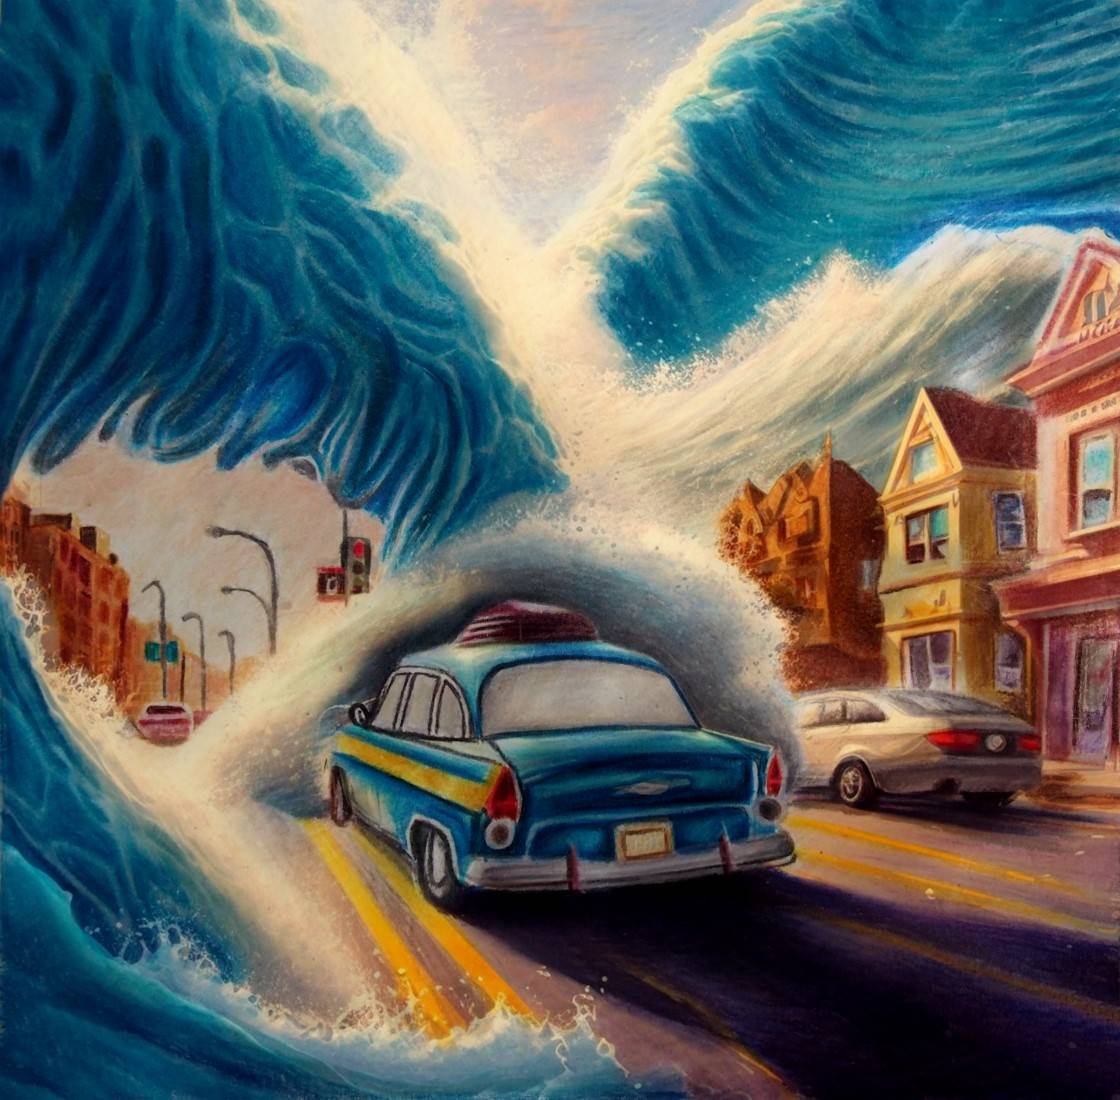 A taxi cab drives down a road lines with homes as huge waves arc over it and splash onto the road.